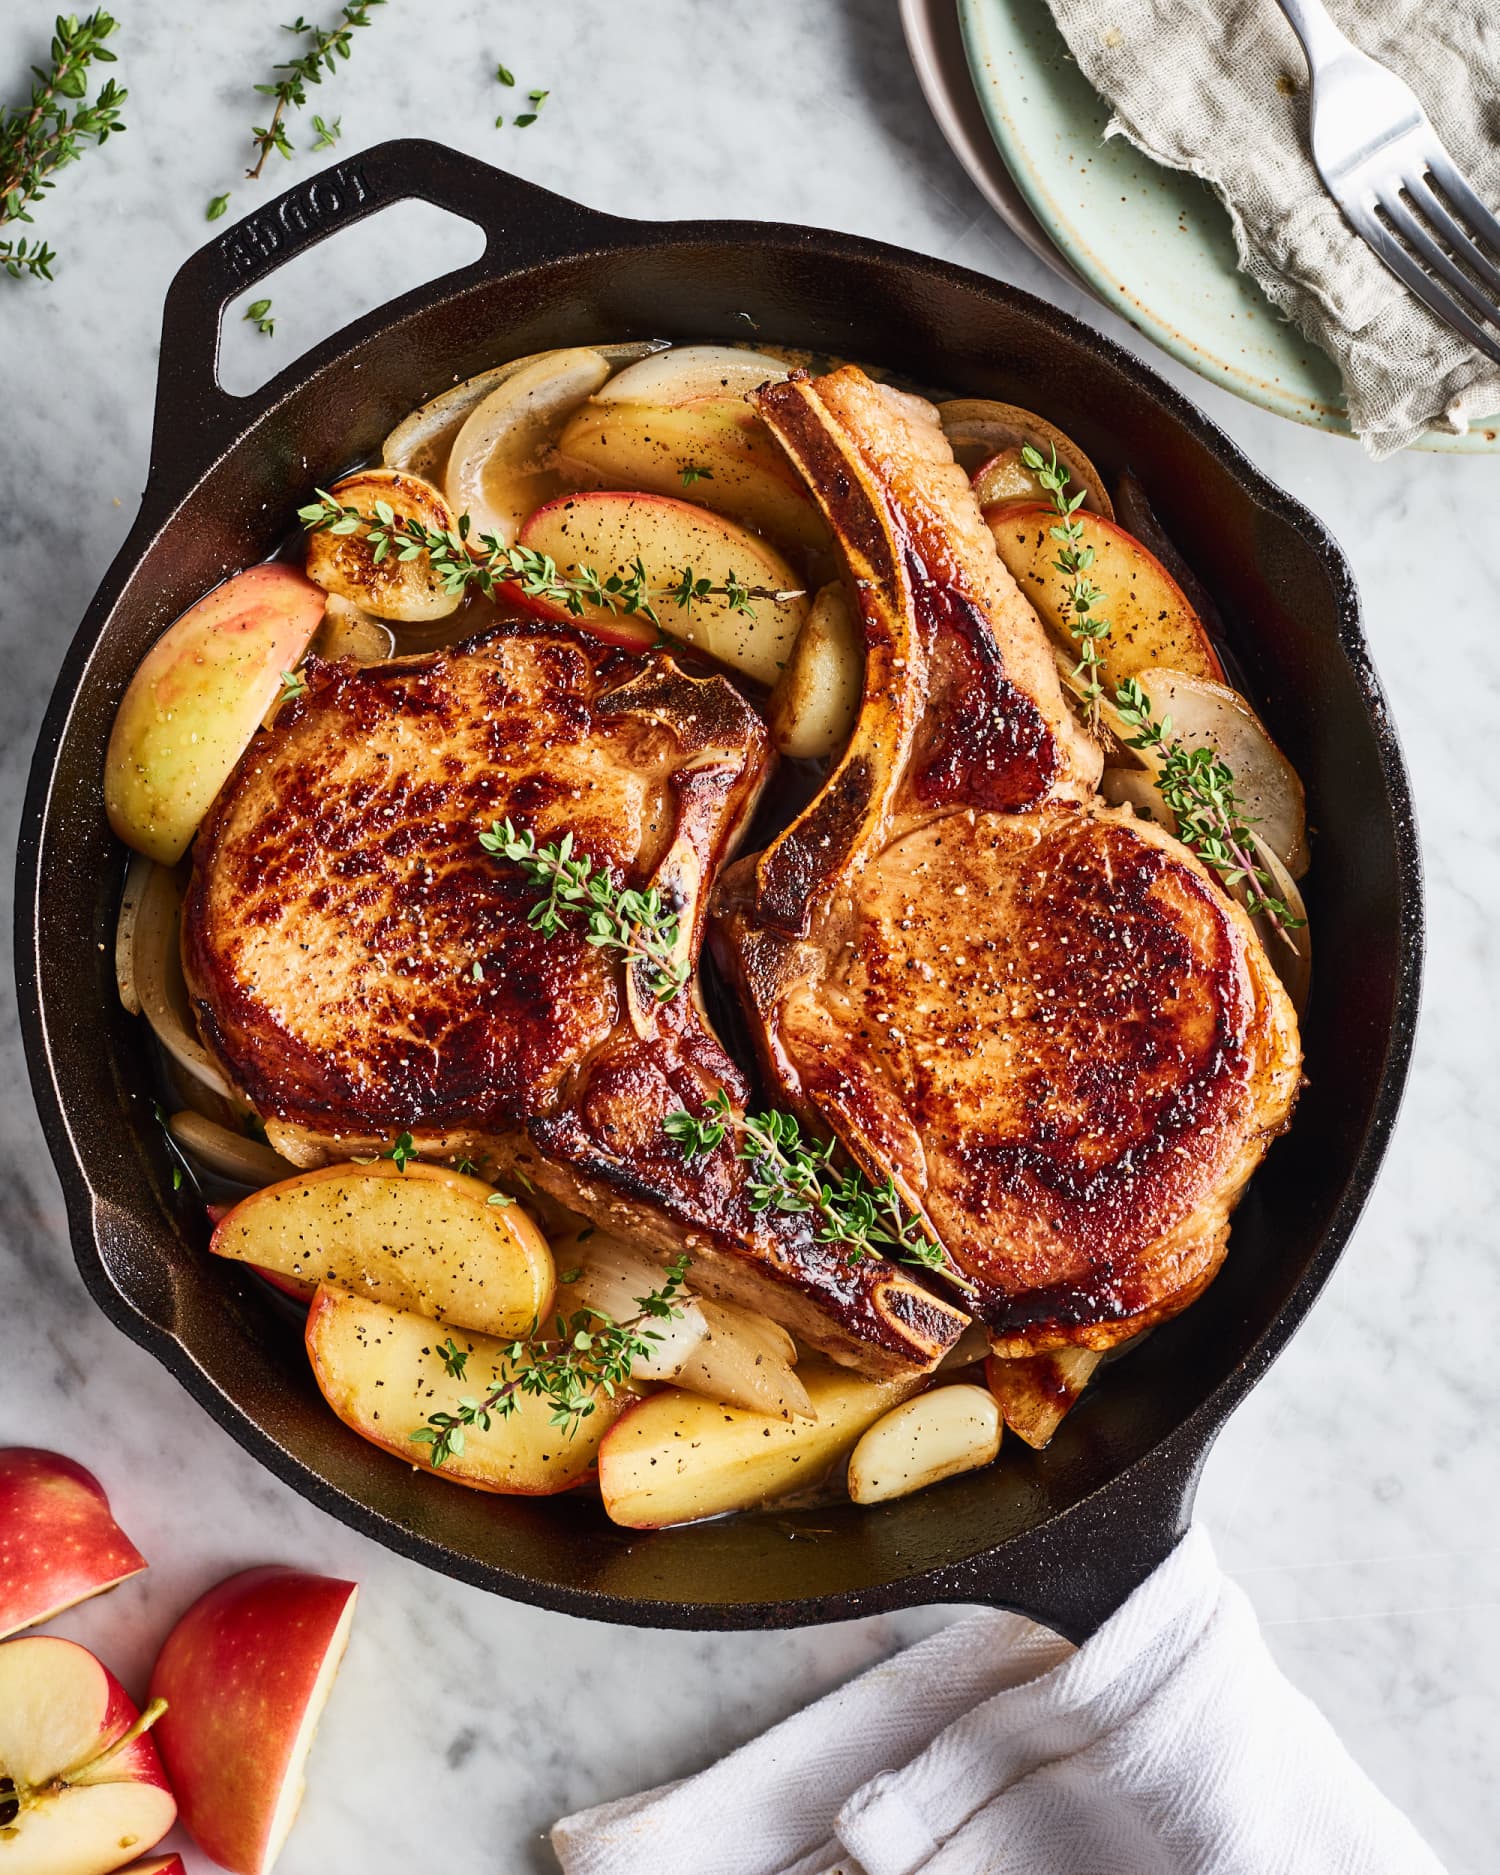 Easy Skillet Pork Chops with Apples and Onions